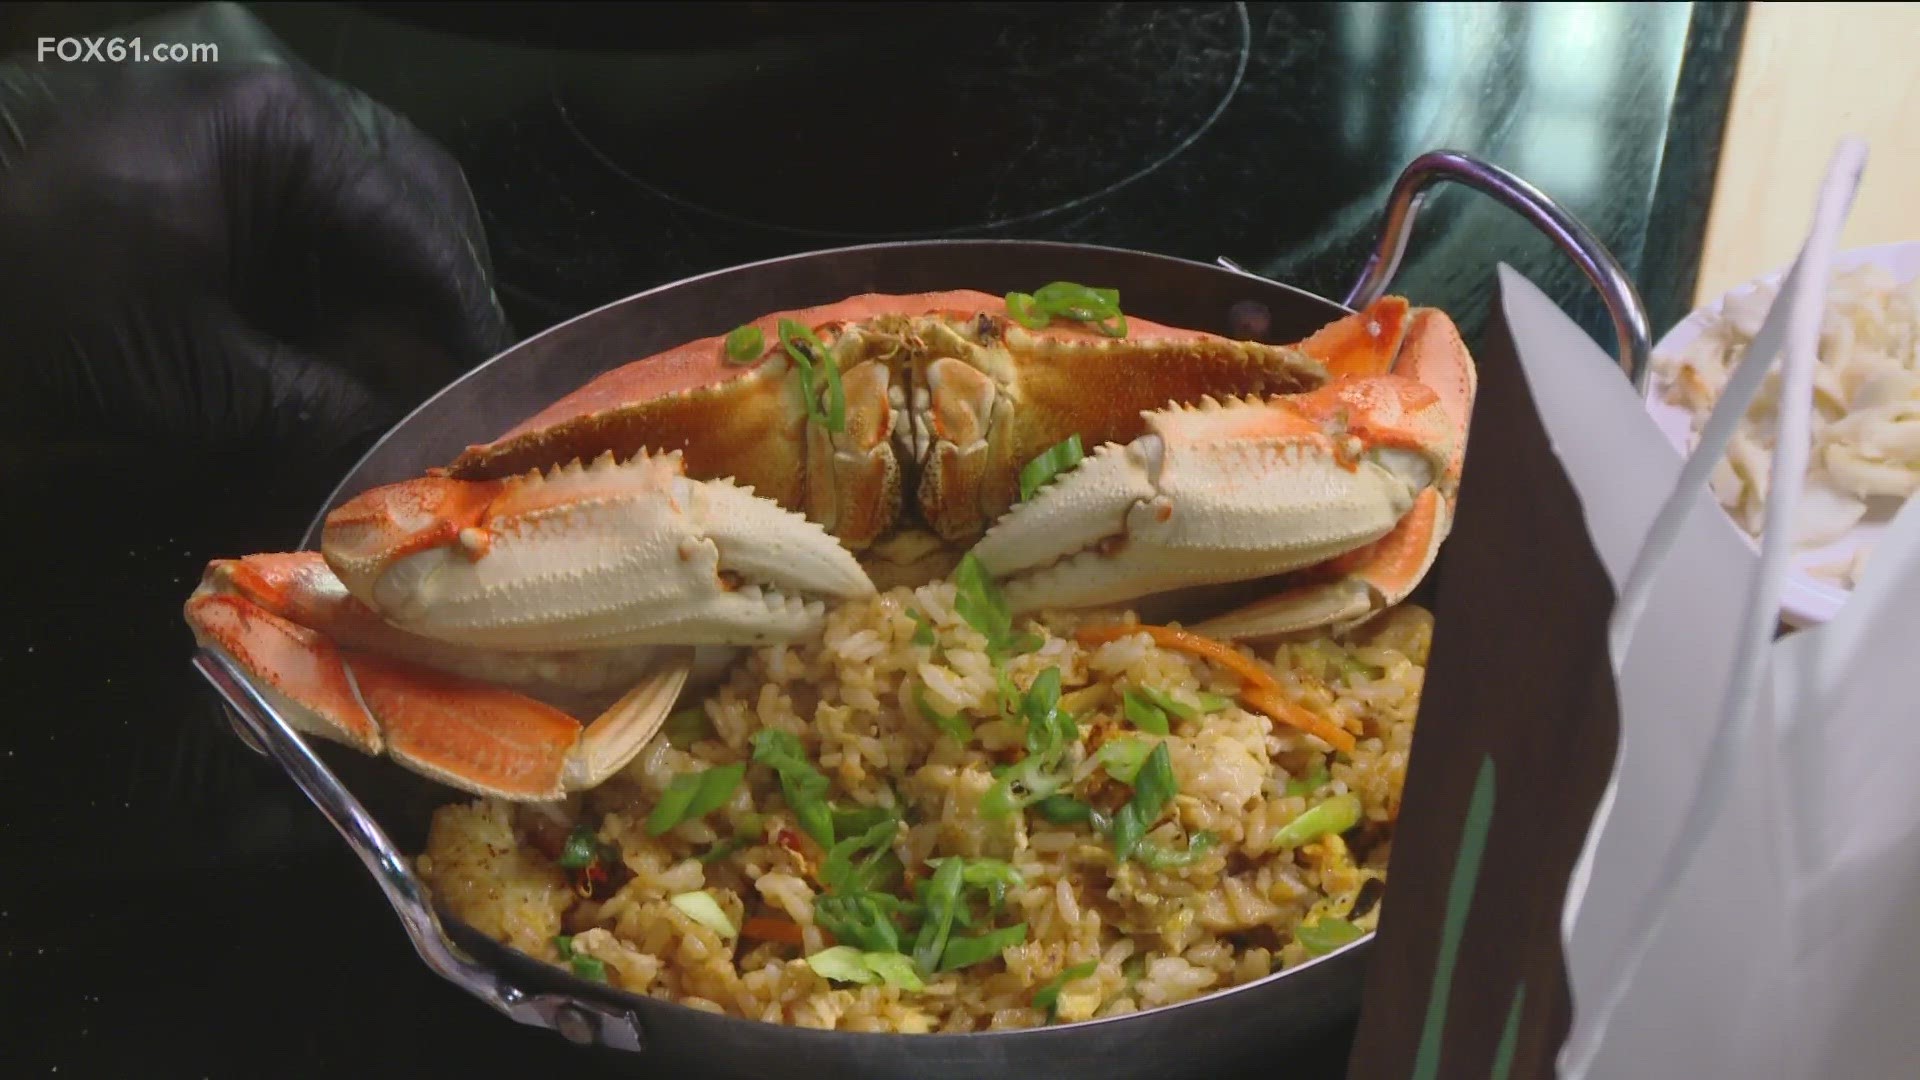 This crab fried rice dish is a perfect addition to any summertime meal!